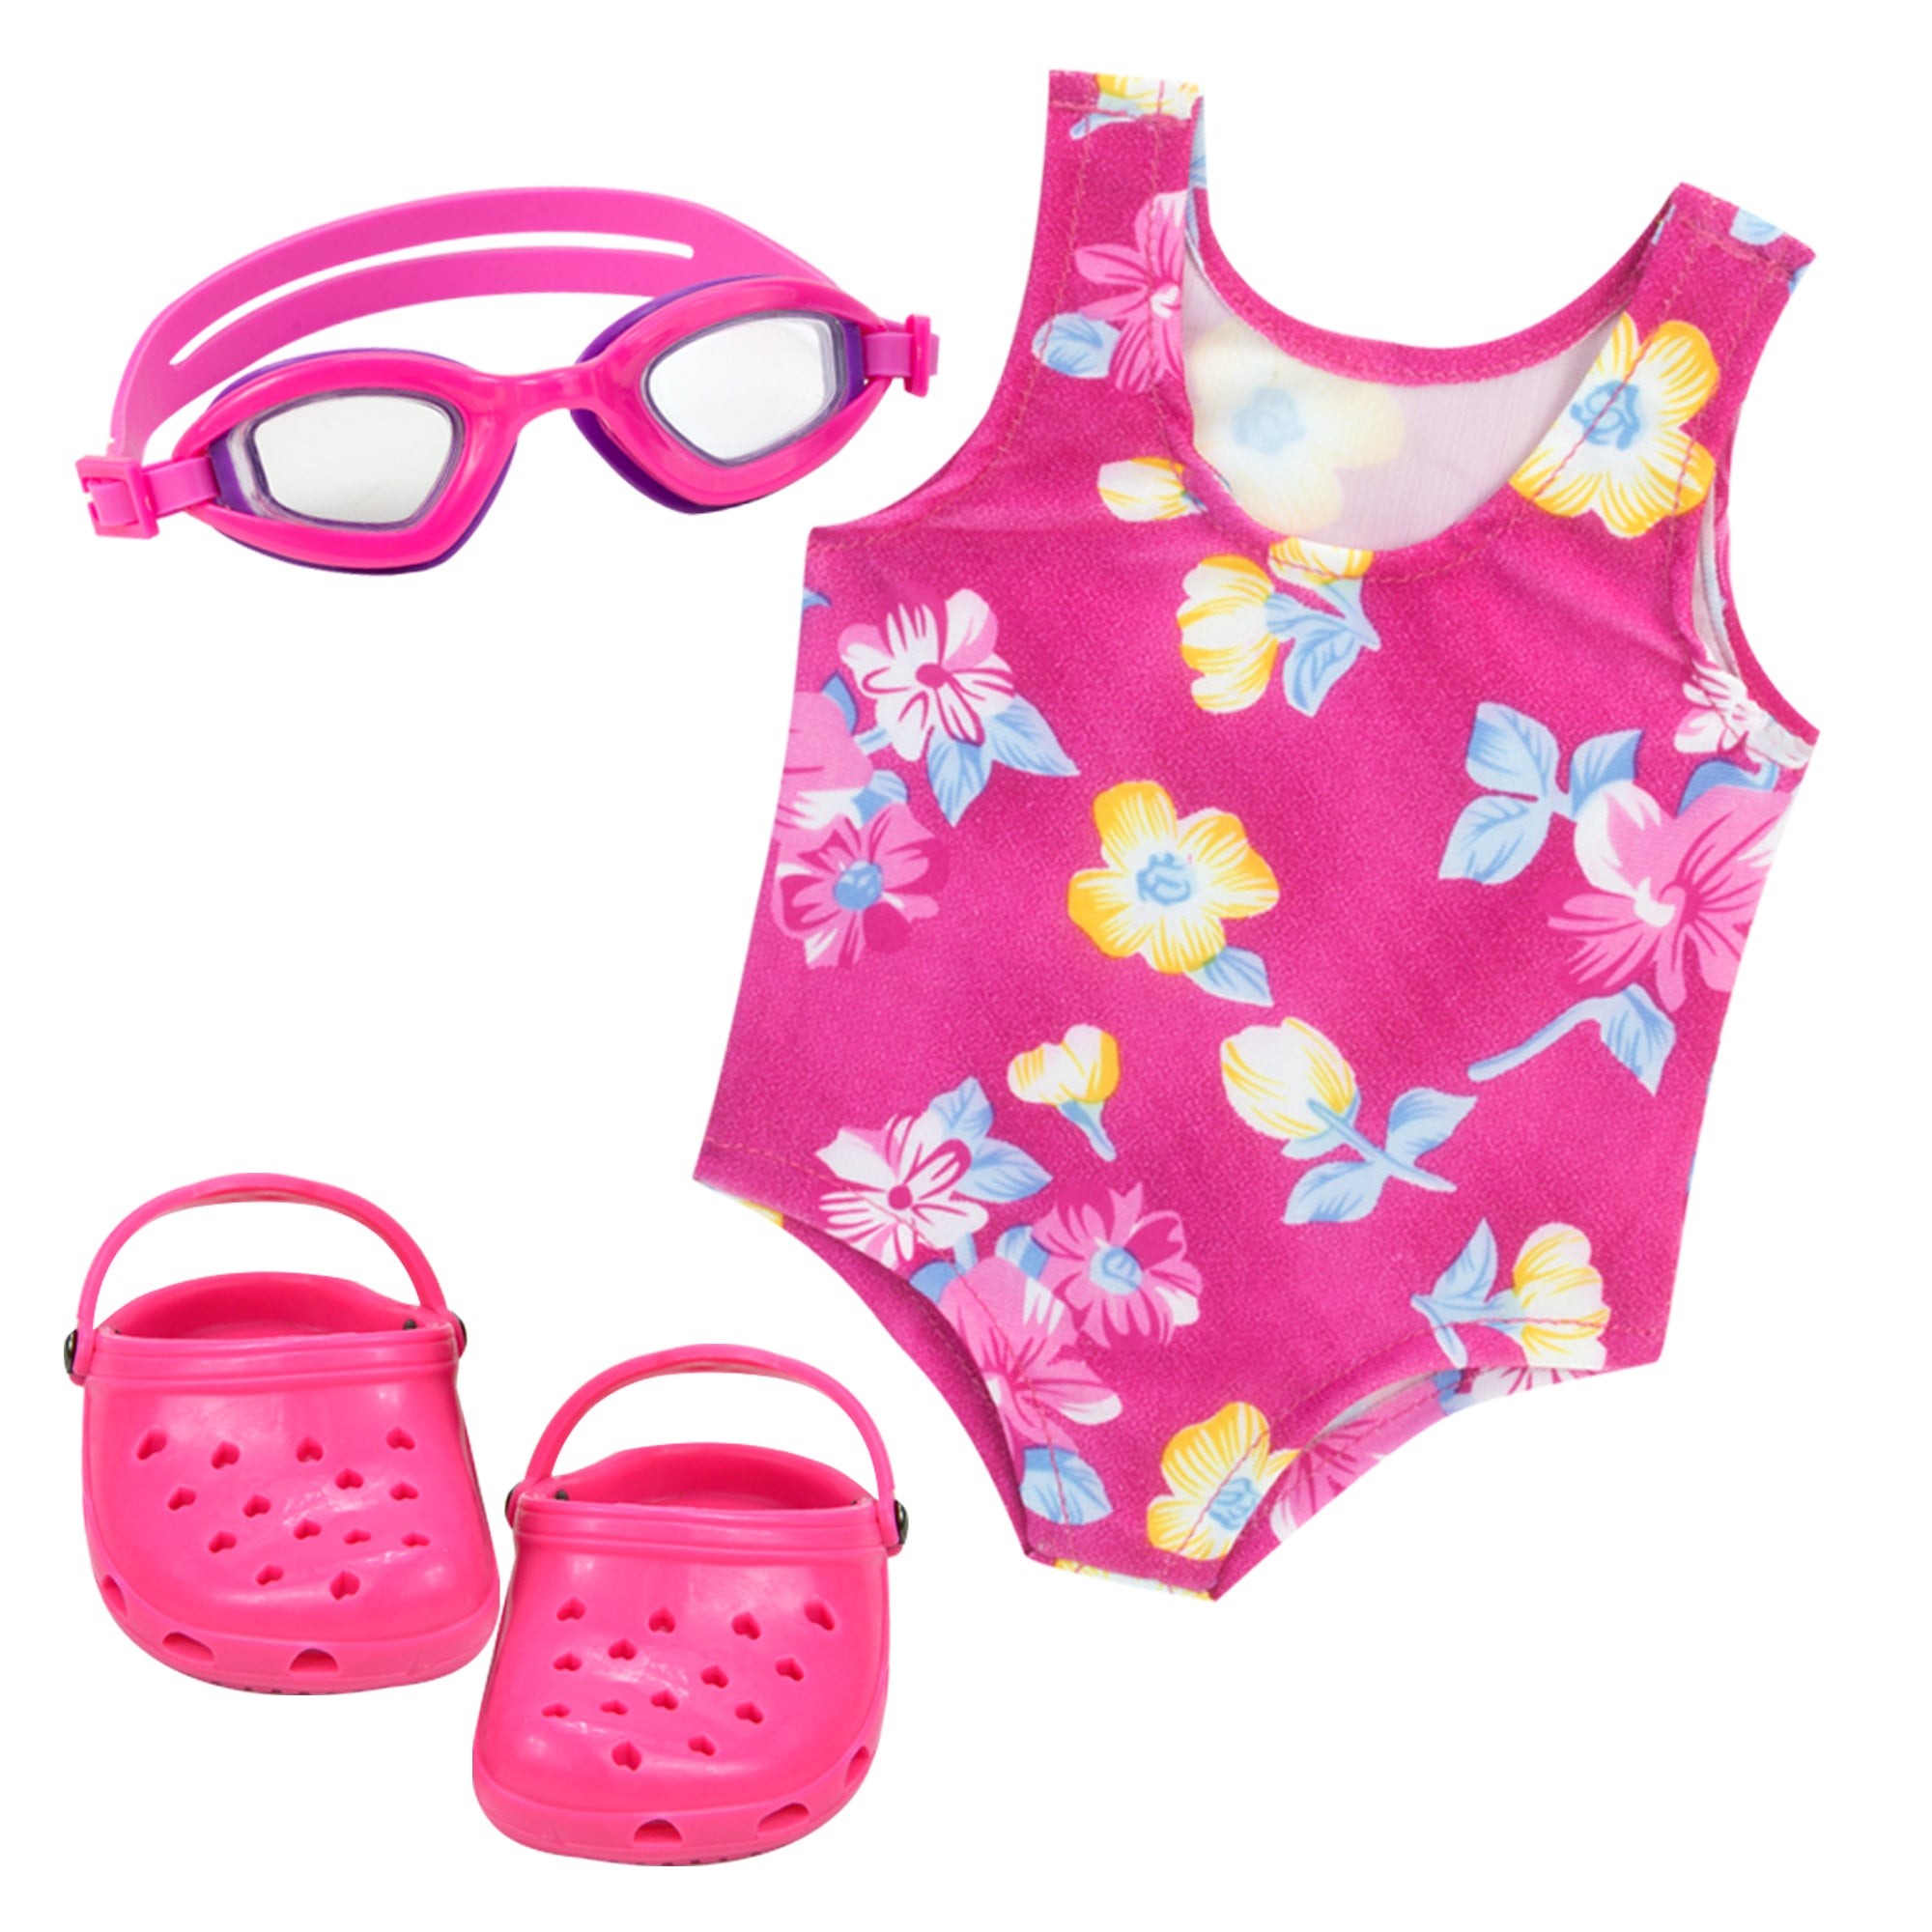 Sophia's 3 Piece Swim Set Includes Floral Swimsuit, Water Goggles and Sandals for 18" Dolls, Hot Pink